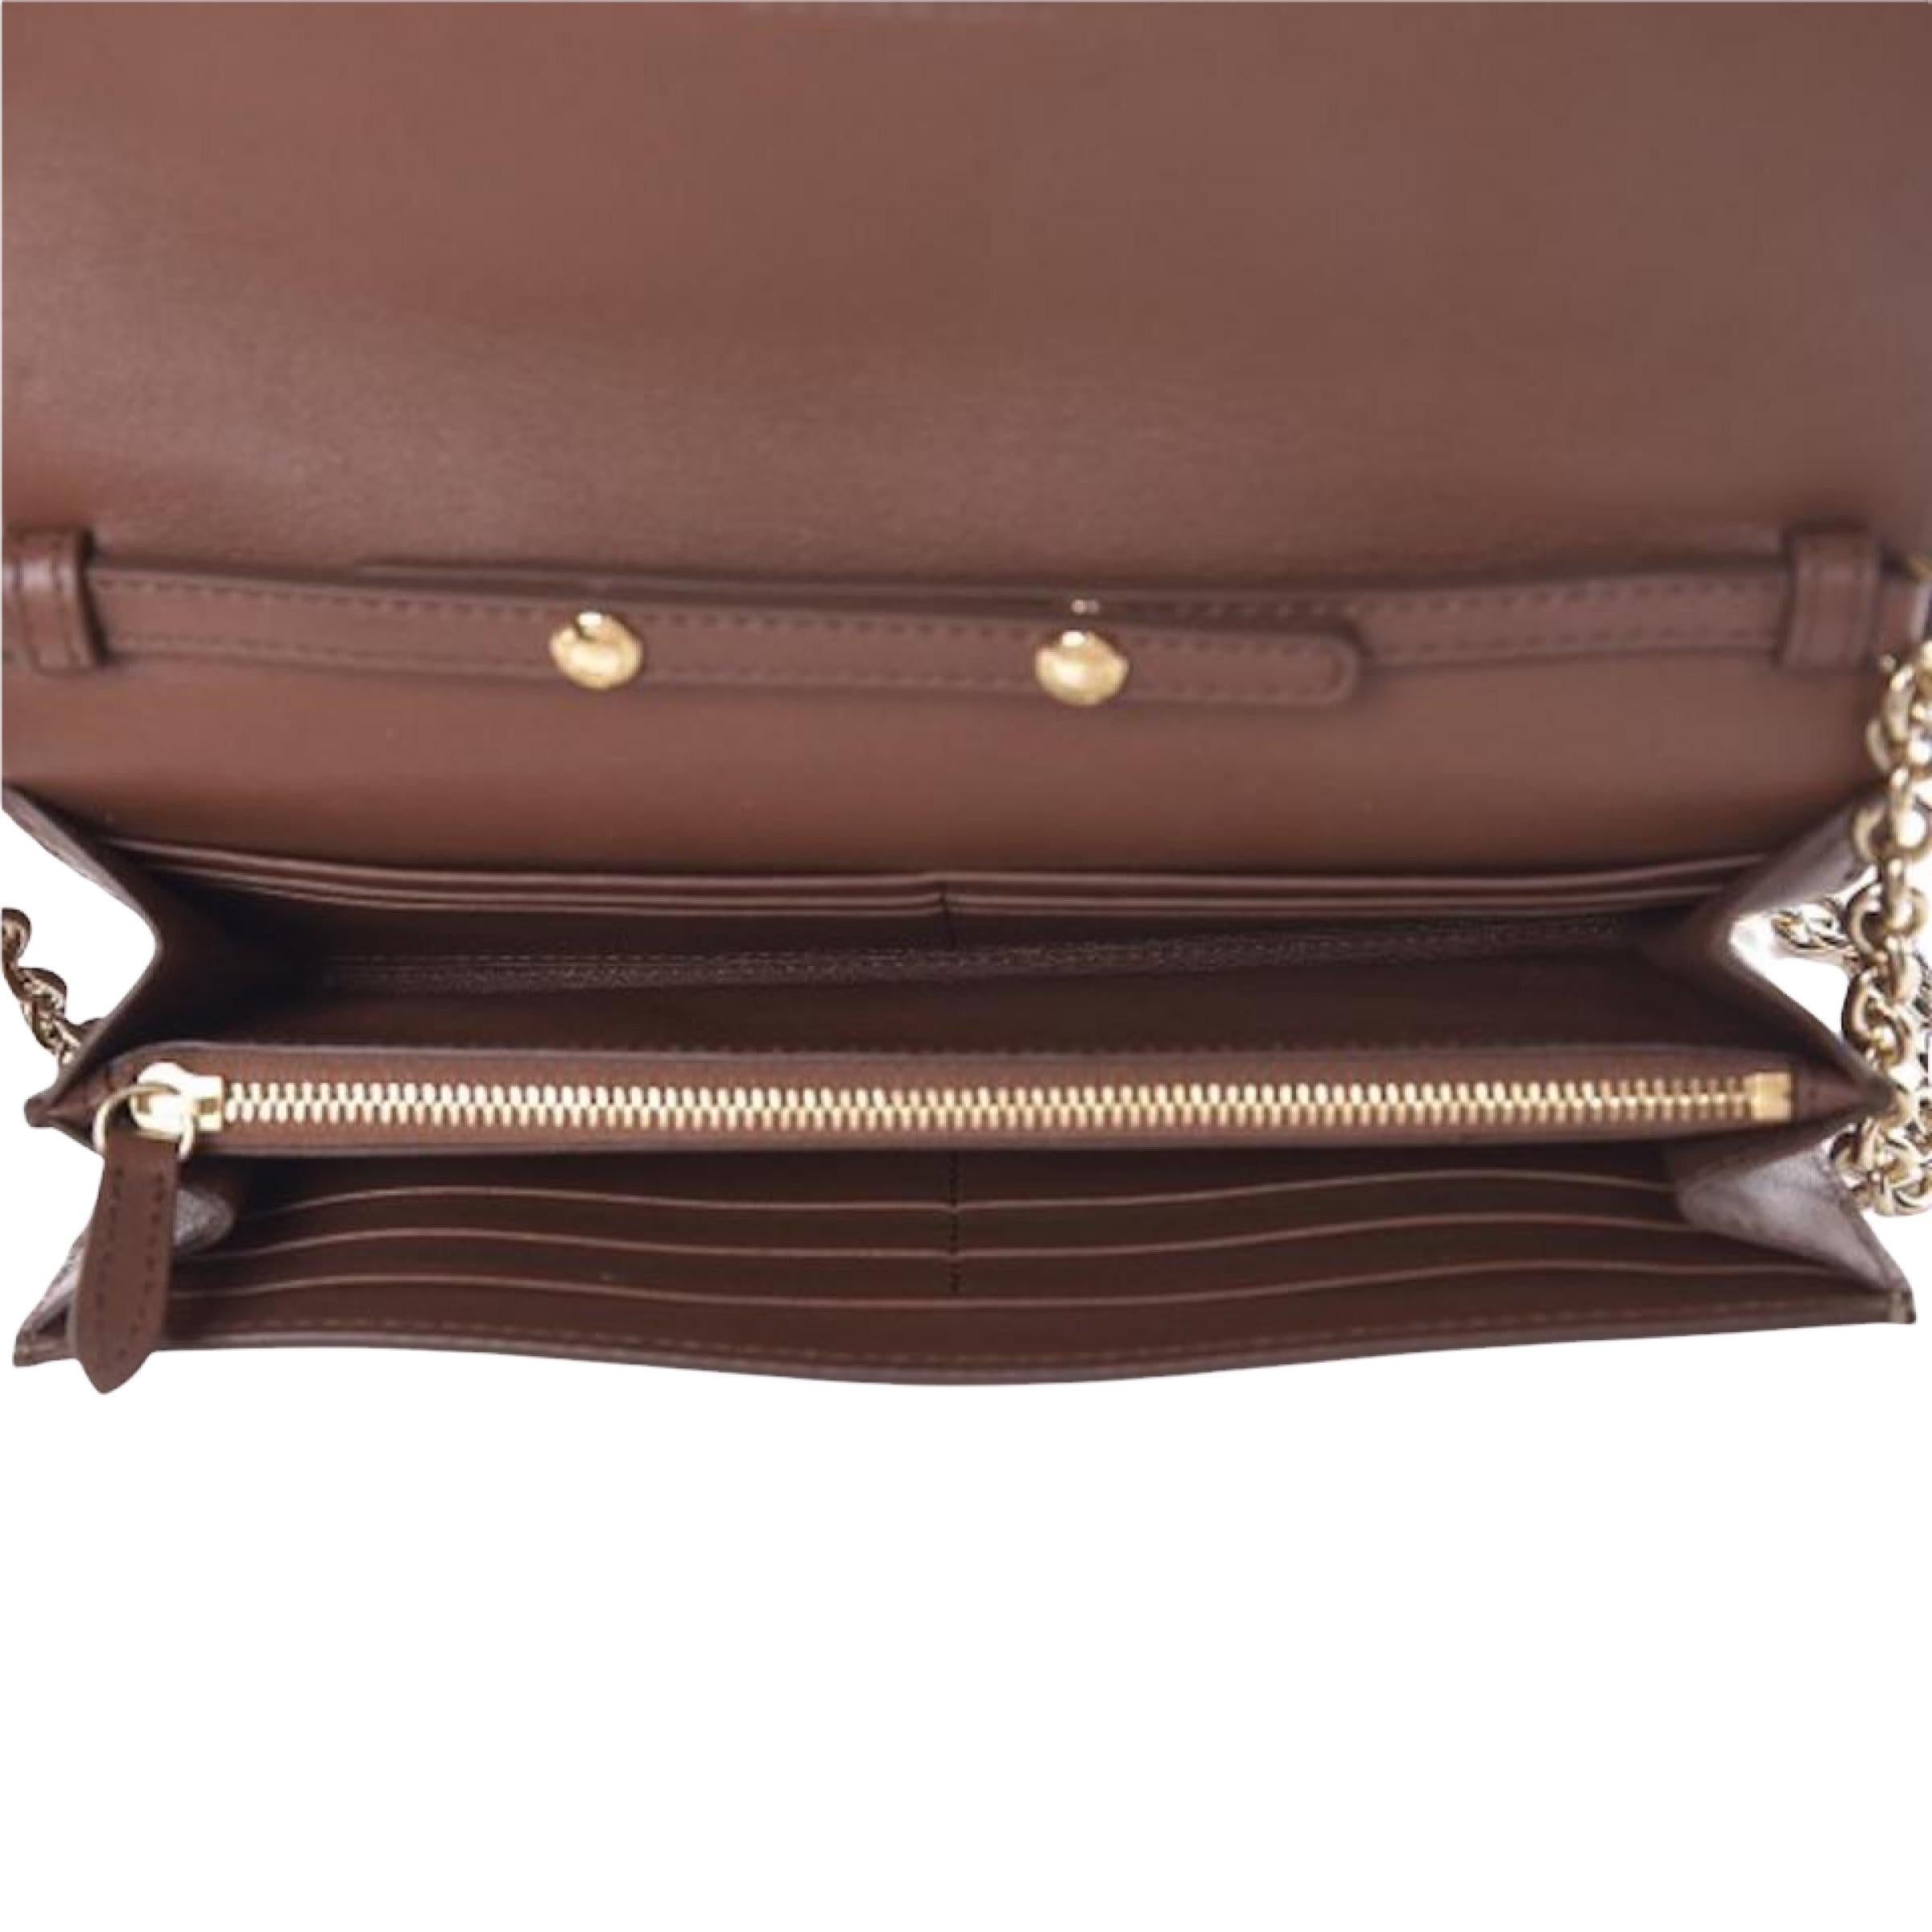 NEW Burberry Brown Henley House Check Leather Clutch Crossbody Bag For Sale 2